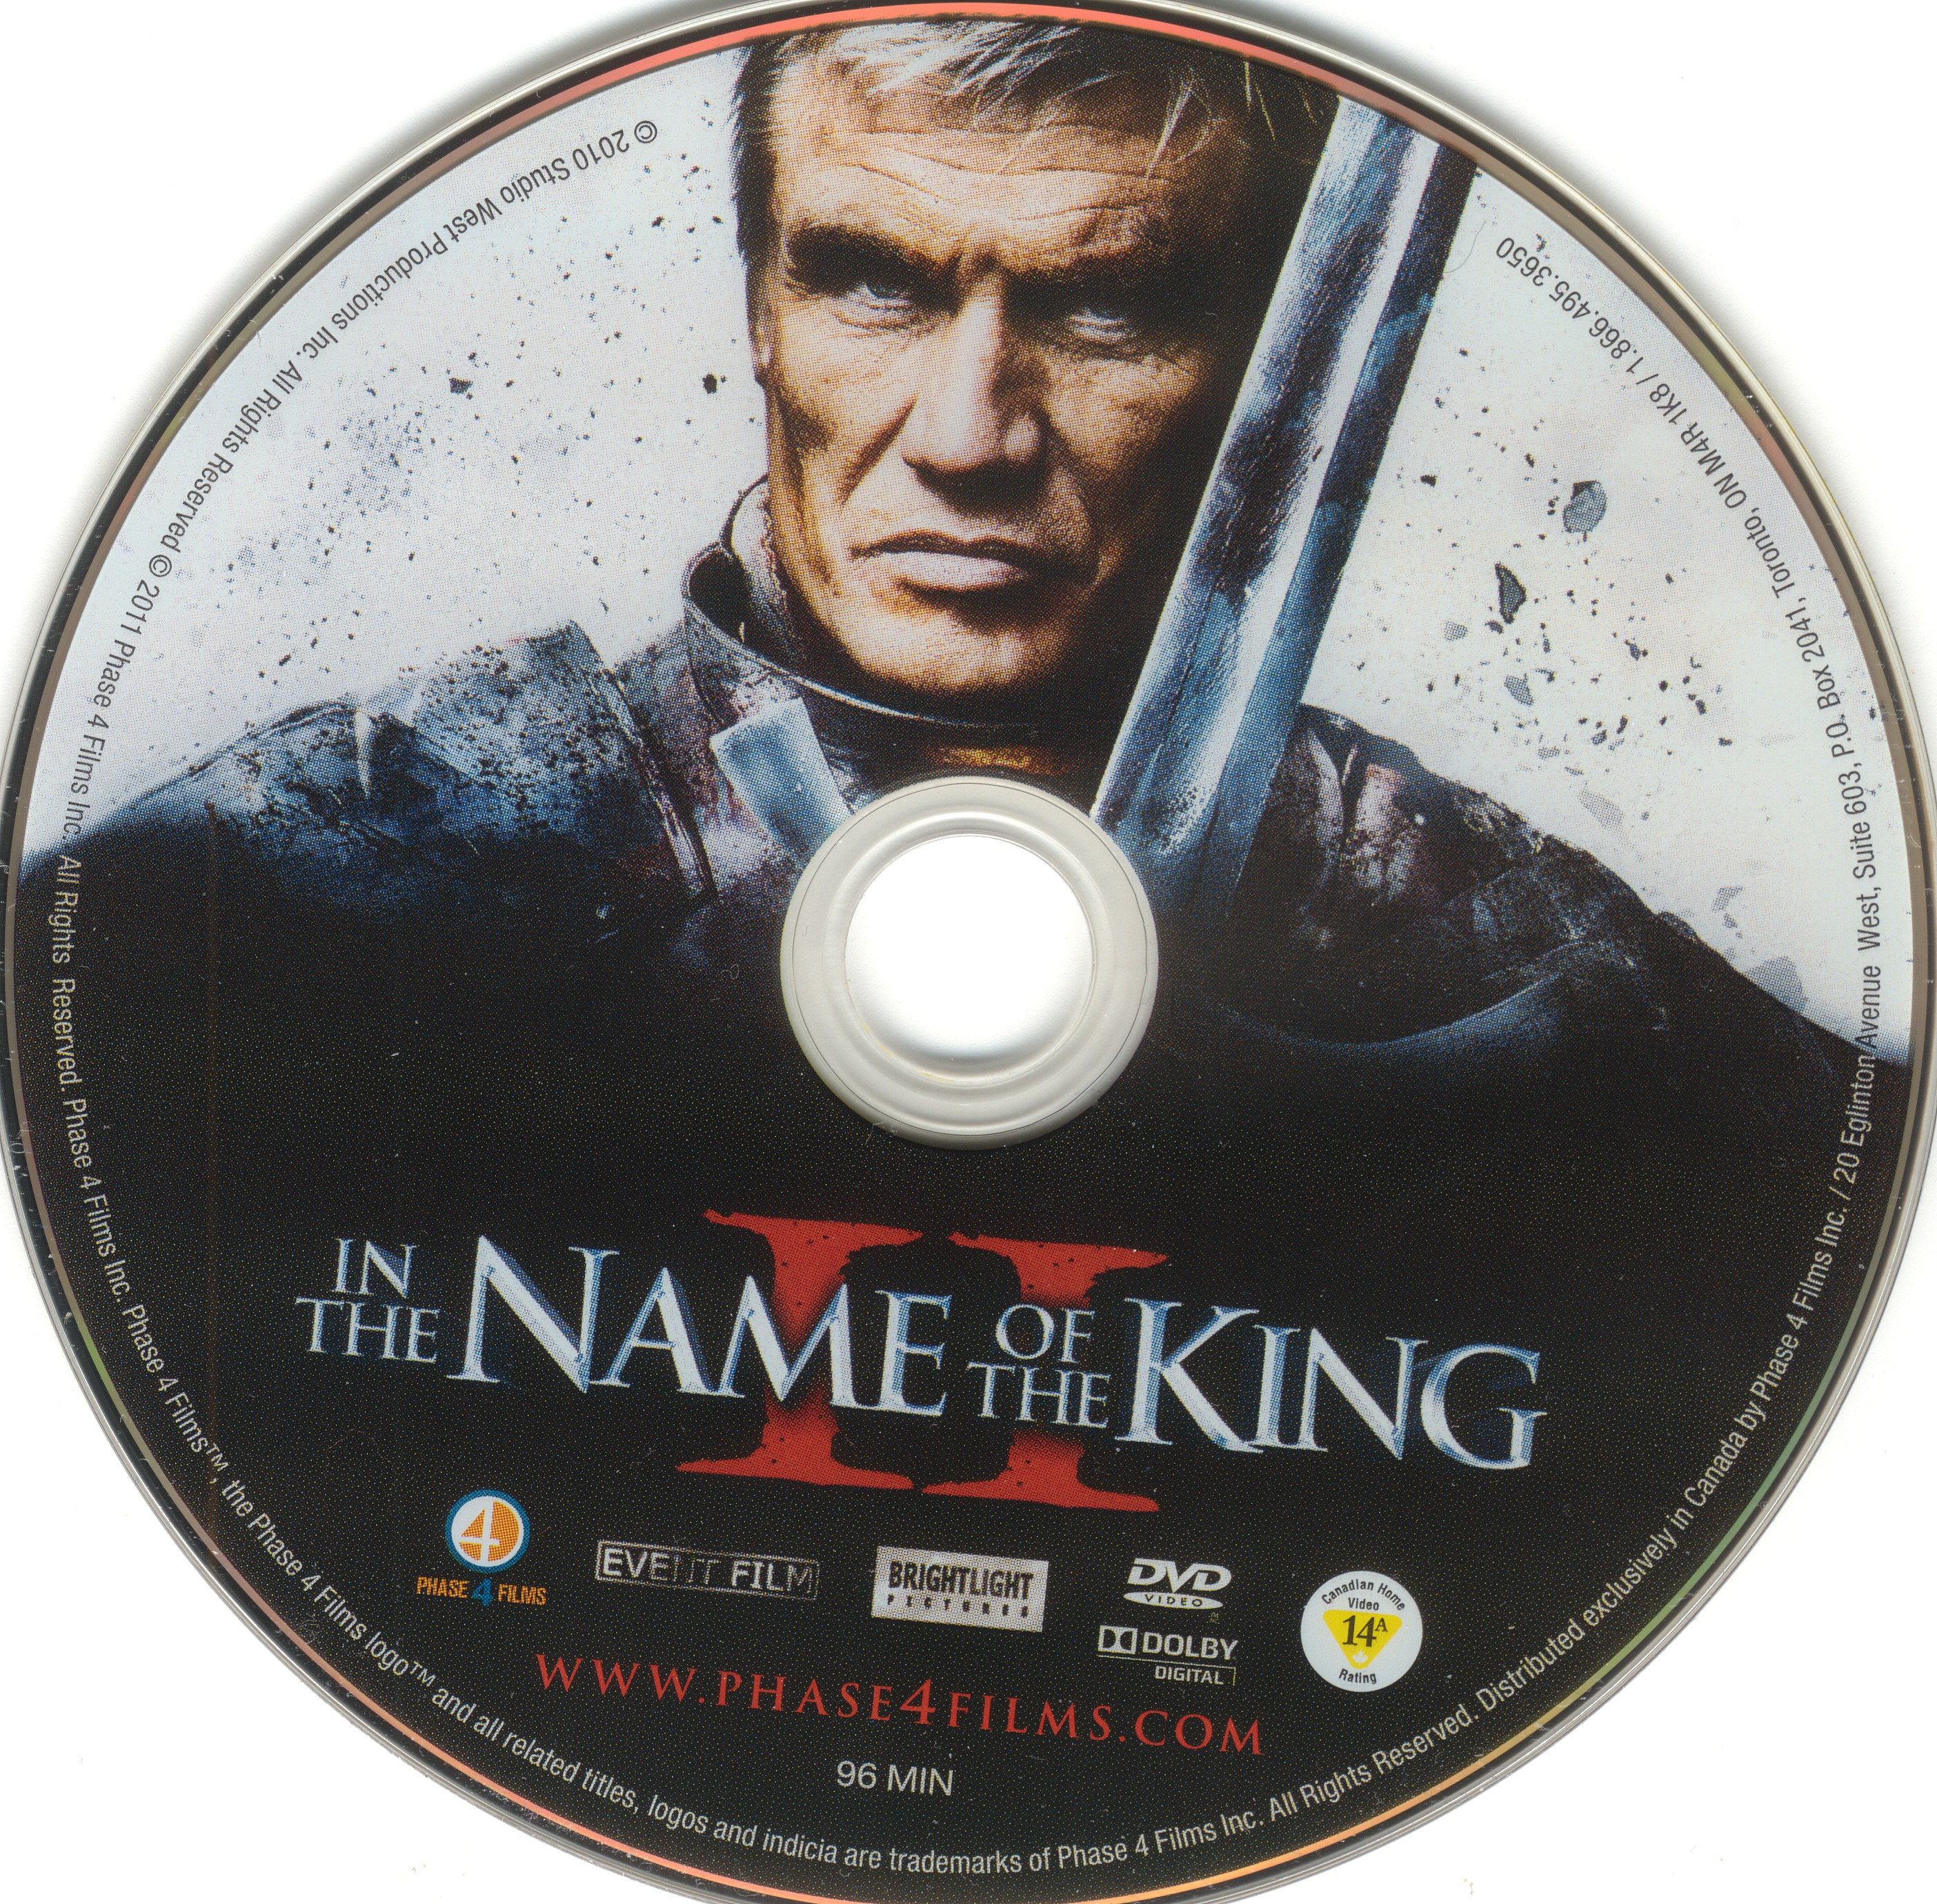 In the name of the king 2 - Au nom du roi 2 (Canadienne)